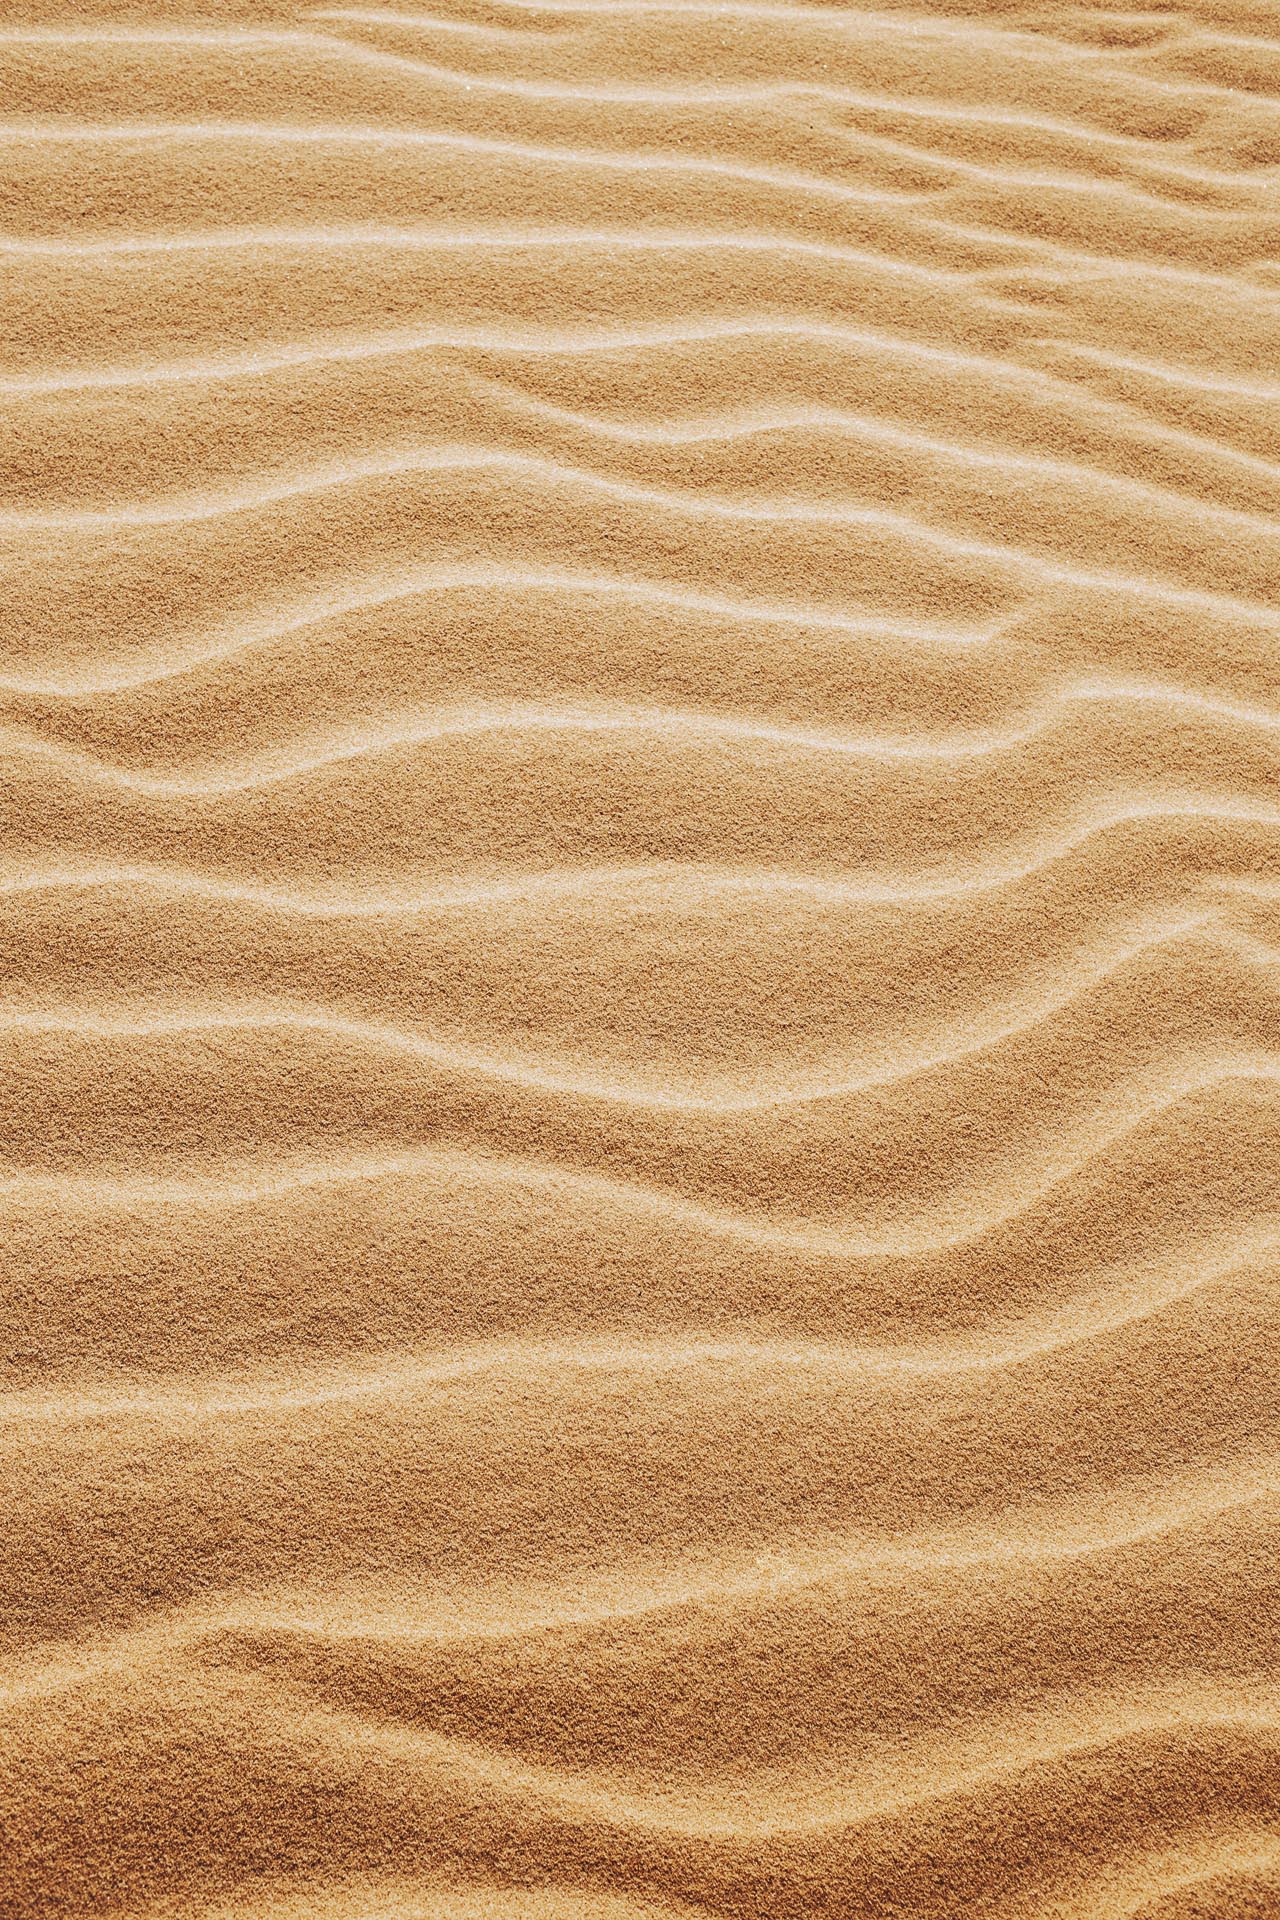 Vertical shot of the patterns on the sands in the desert